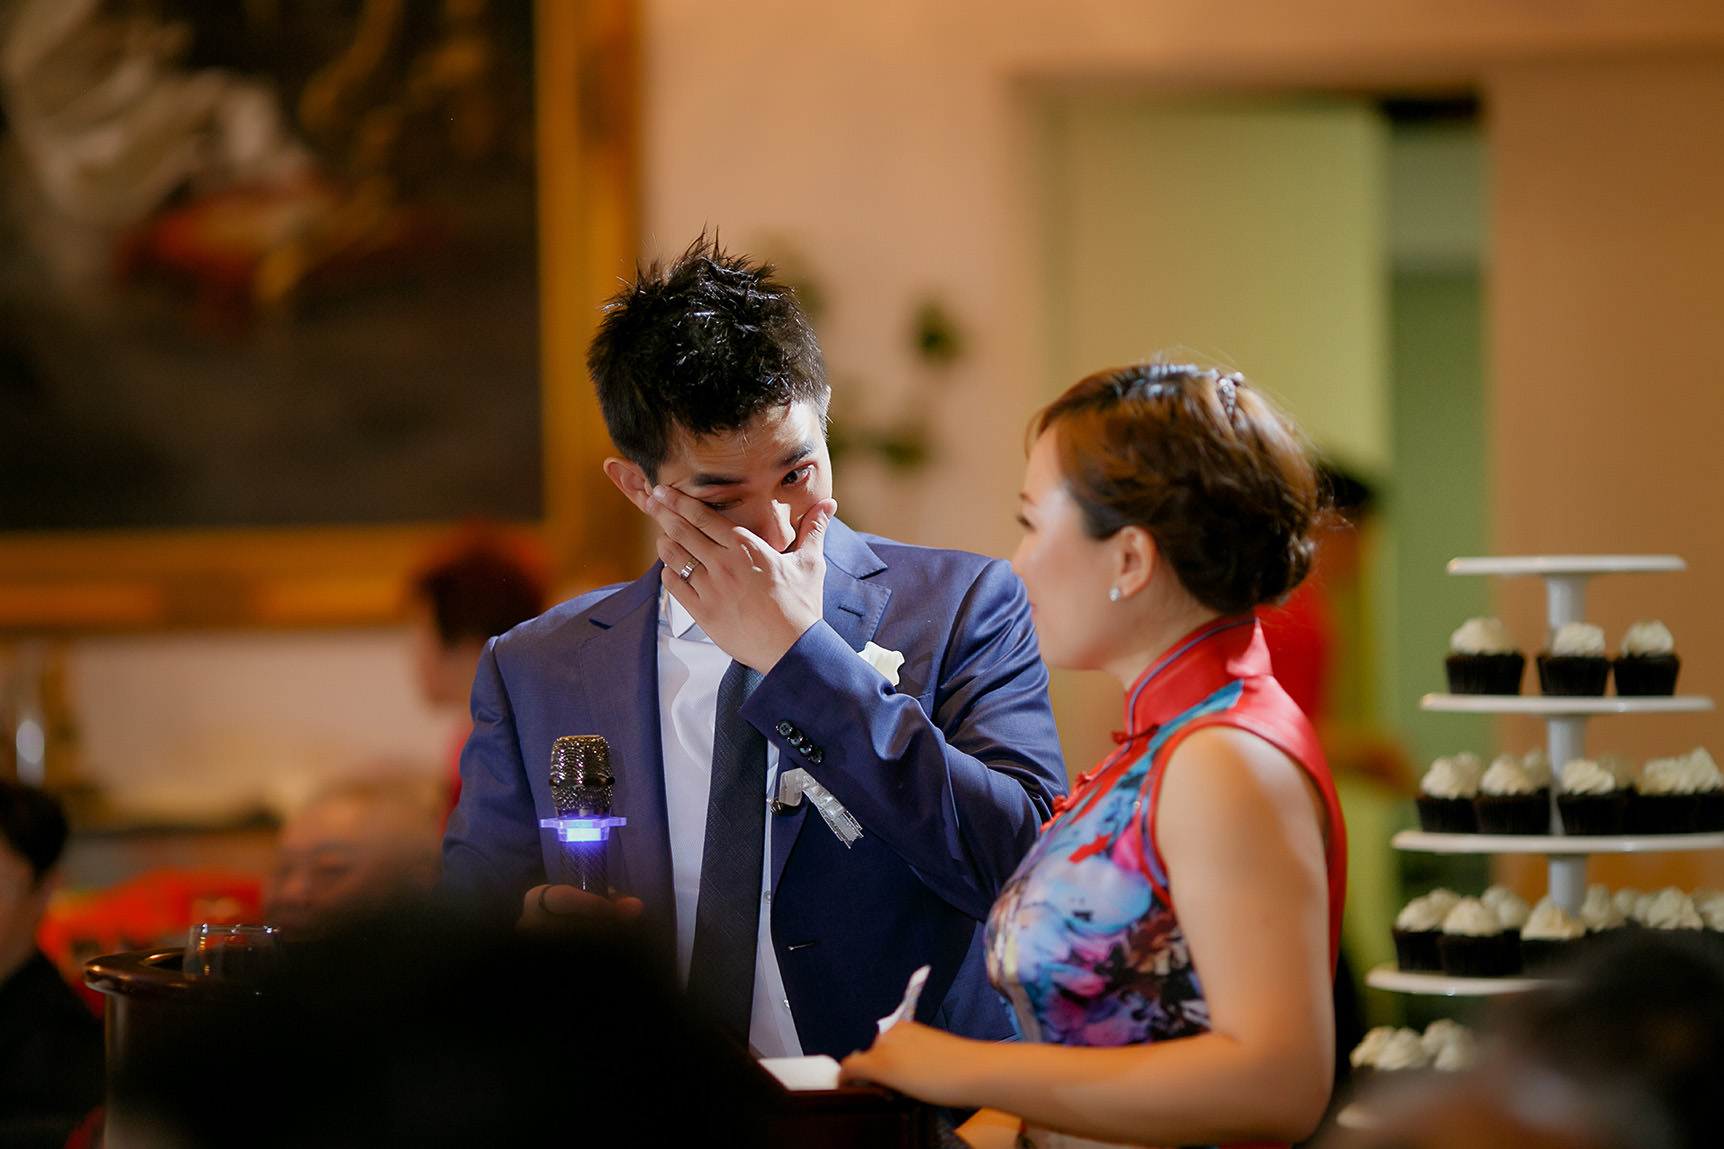 Groom wipes his tears away when he became emotional delivering his speech